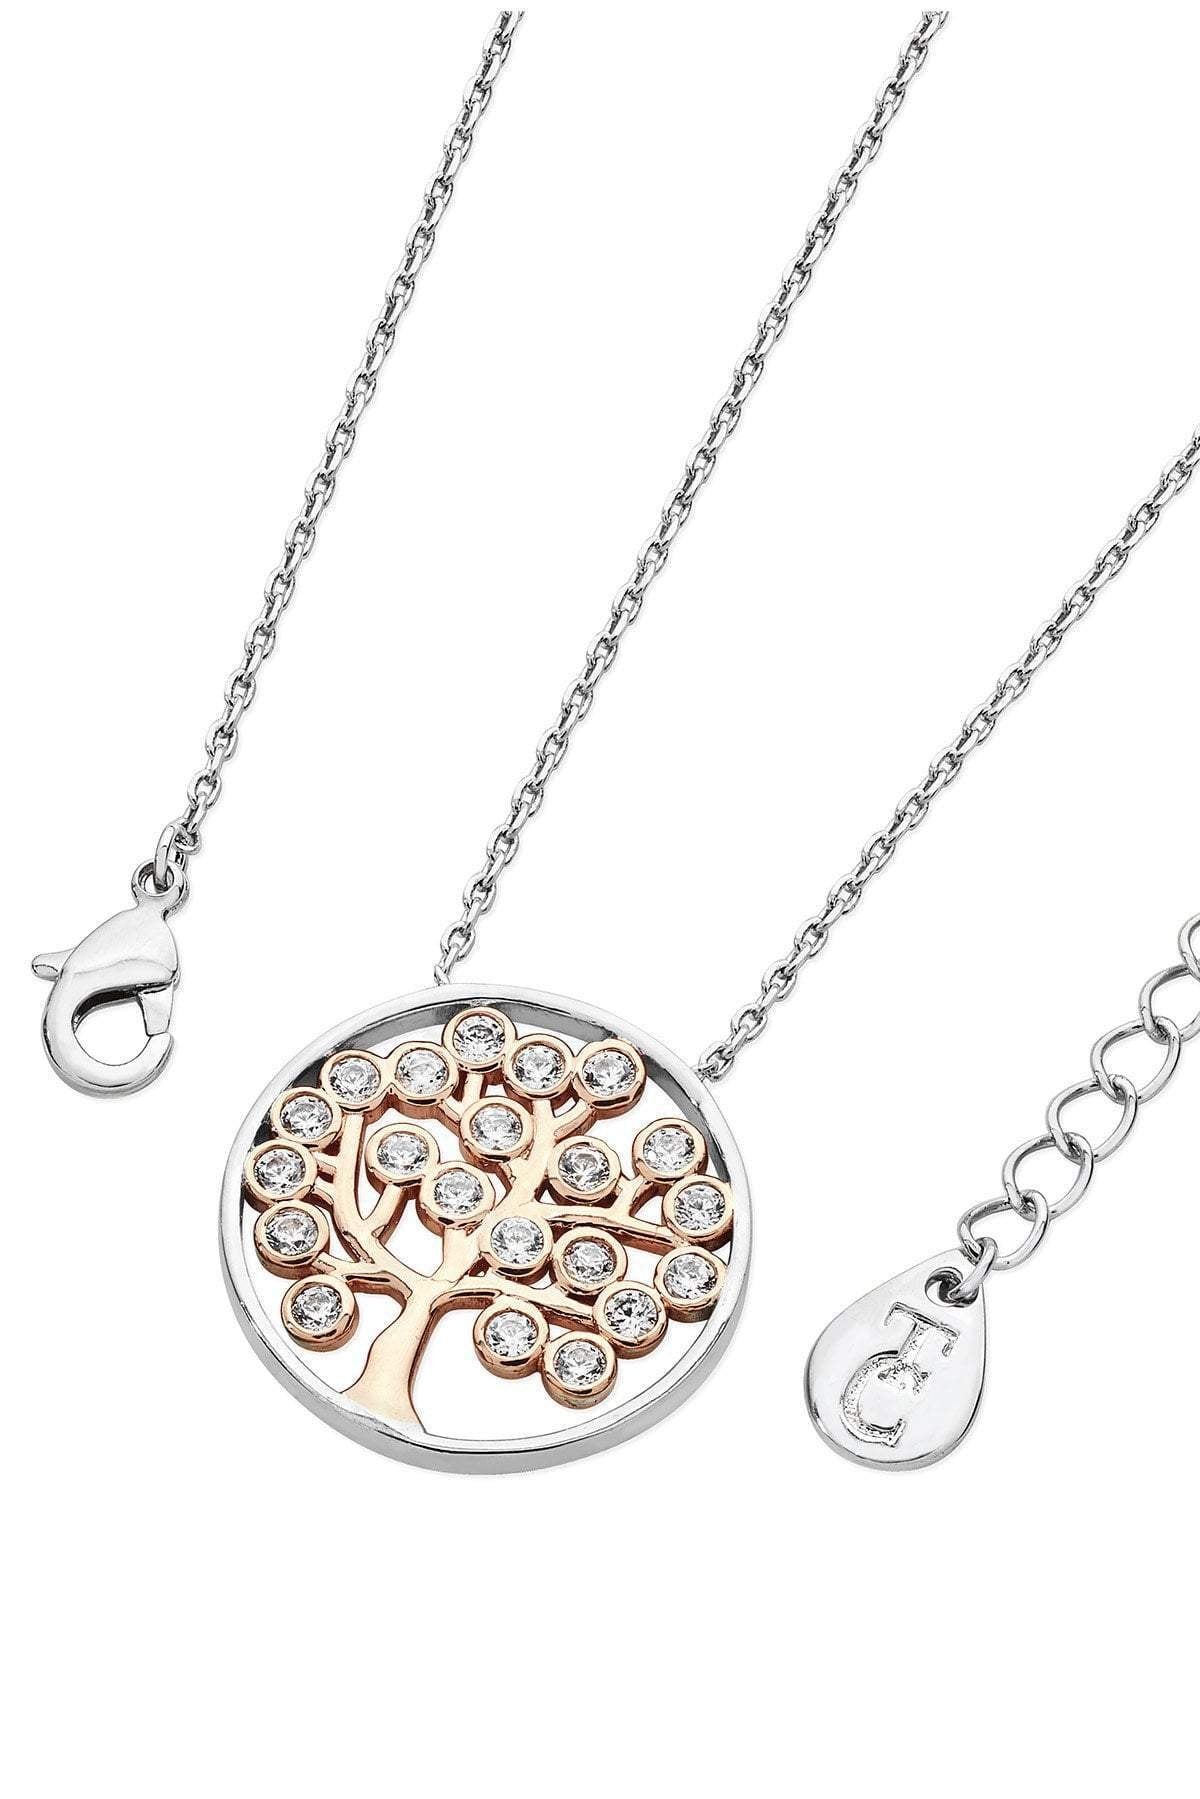 Carraig Donn Two Tone Silver Circle and Rose Gold Tree Pendant